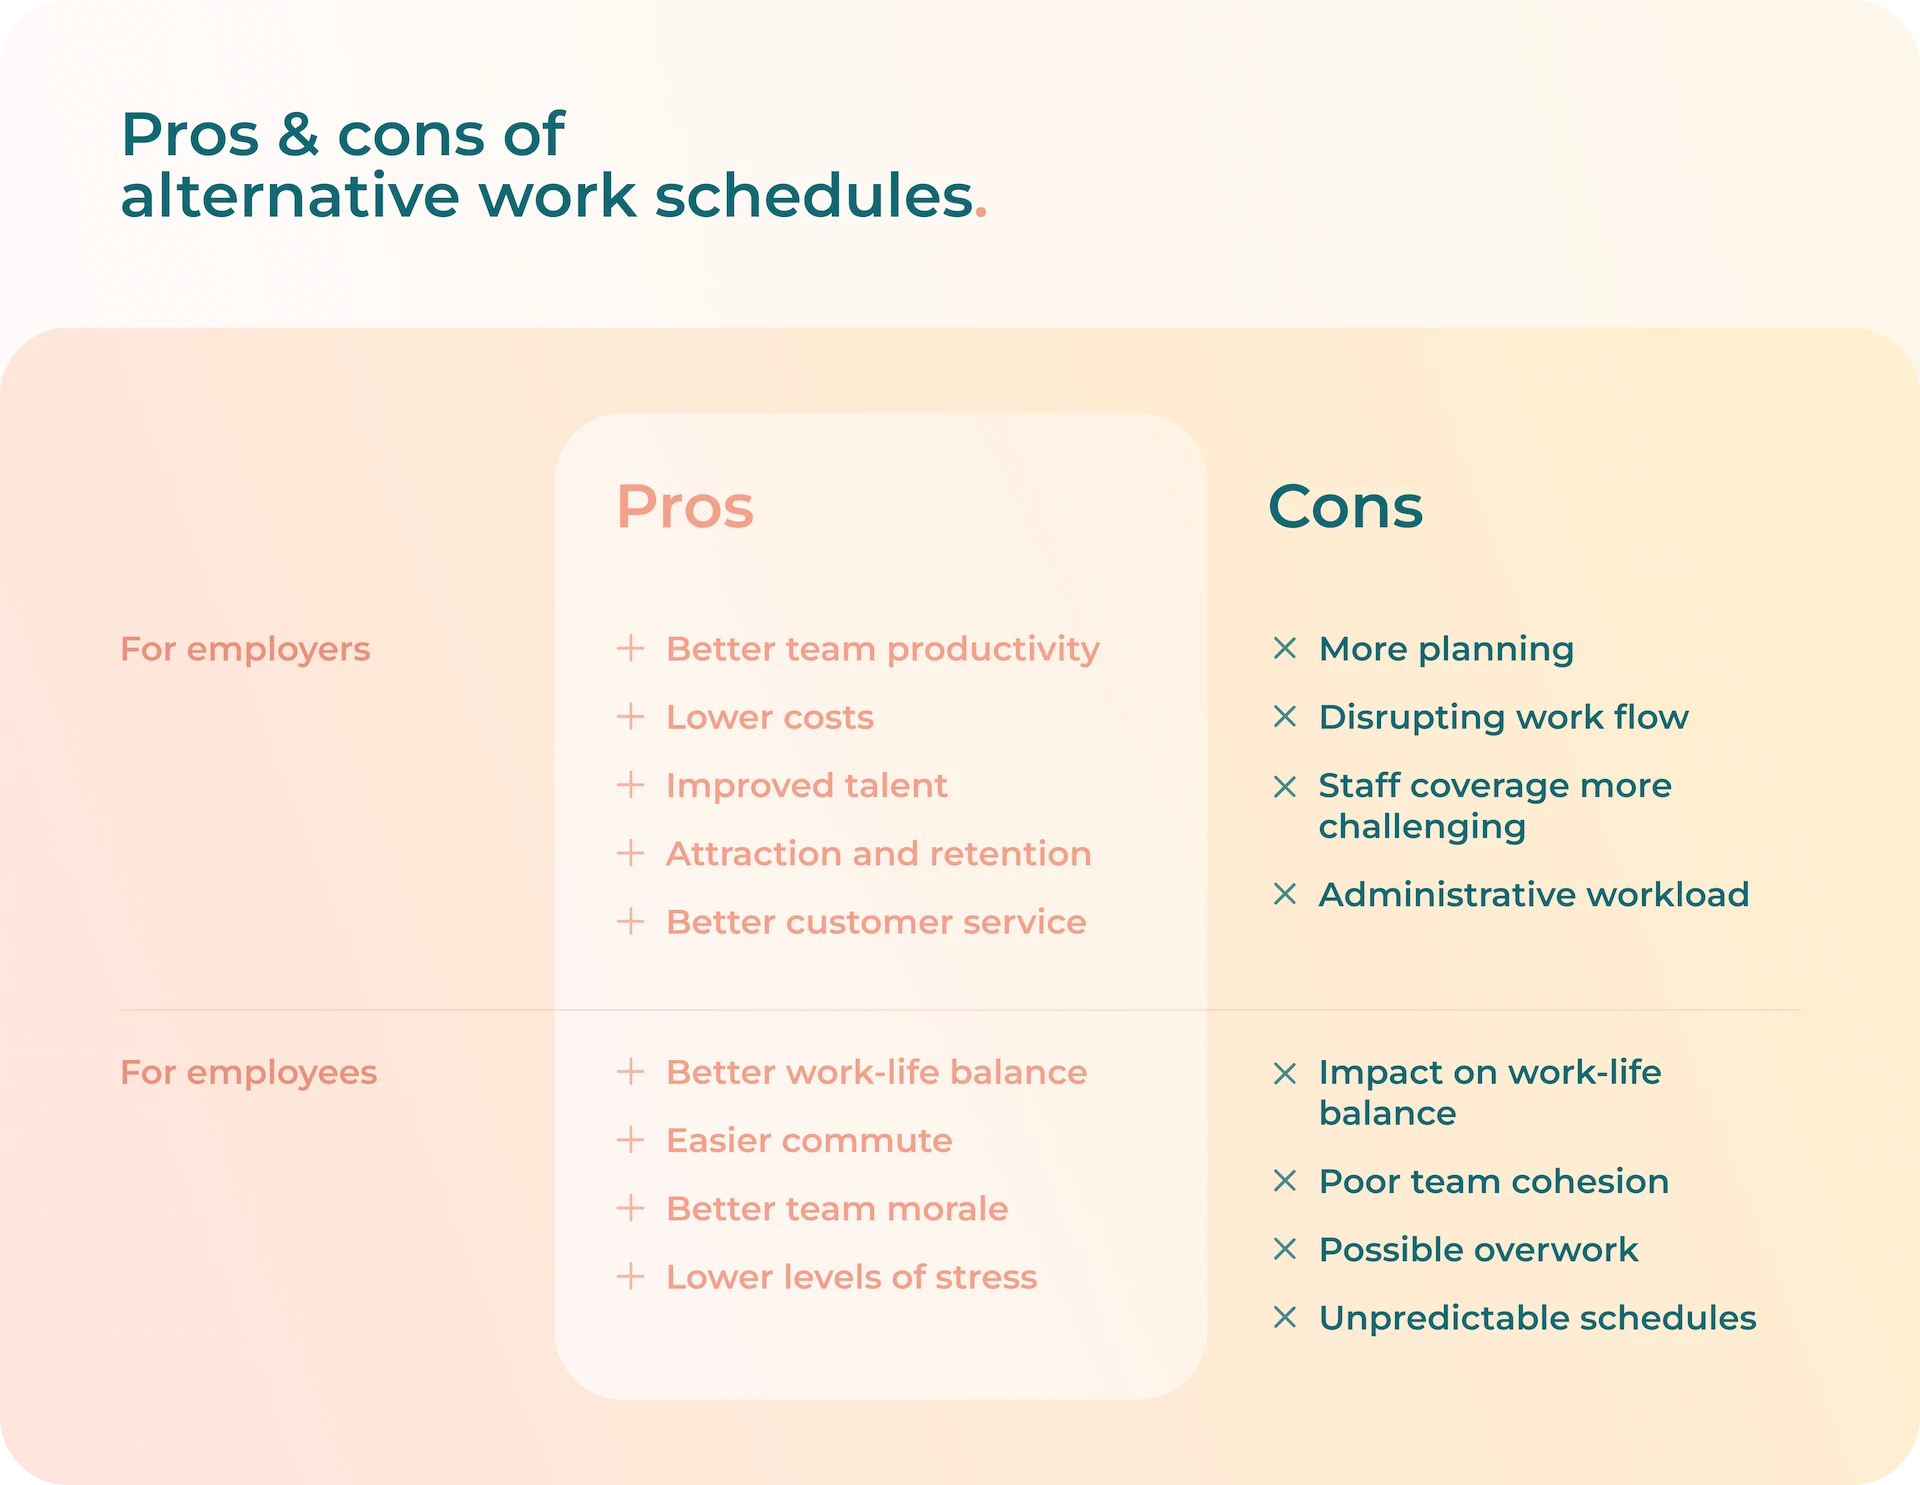 Flexible Schedule vs Alternative Schedule: What's the Difference